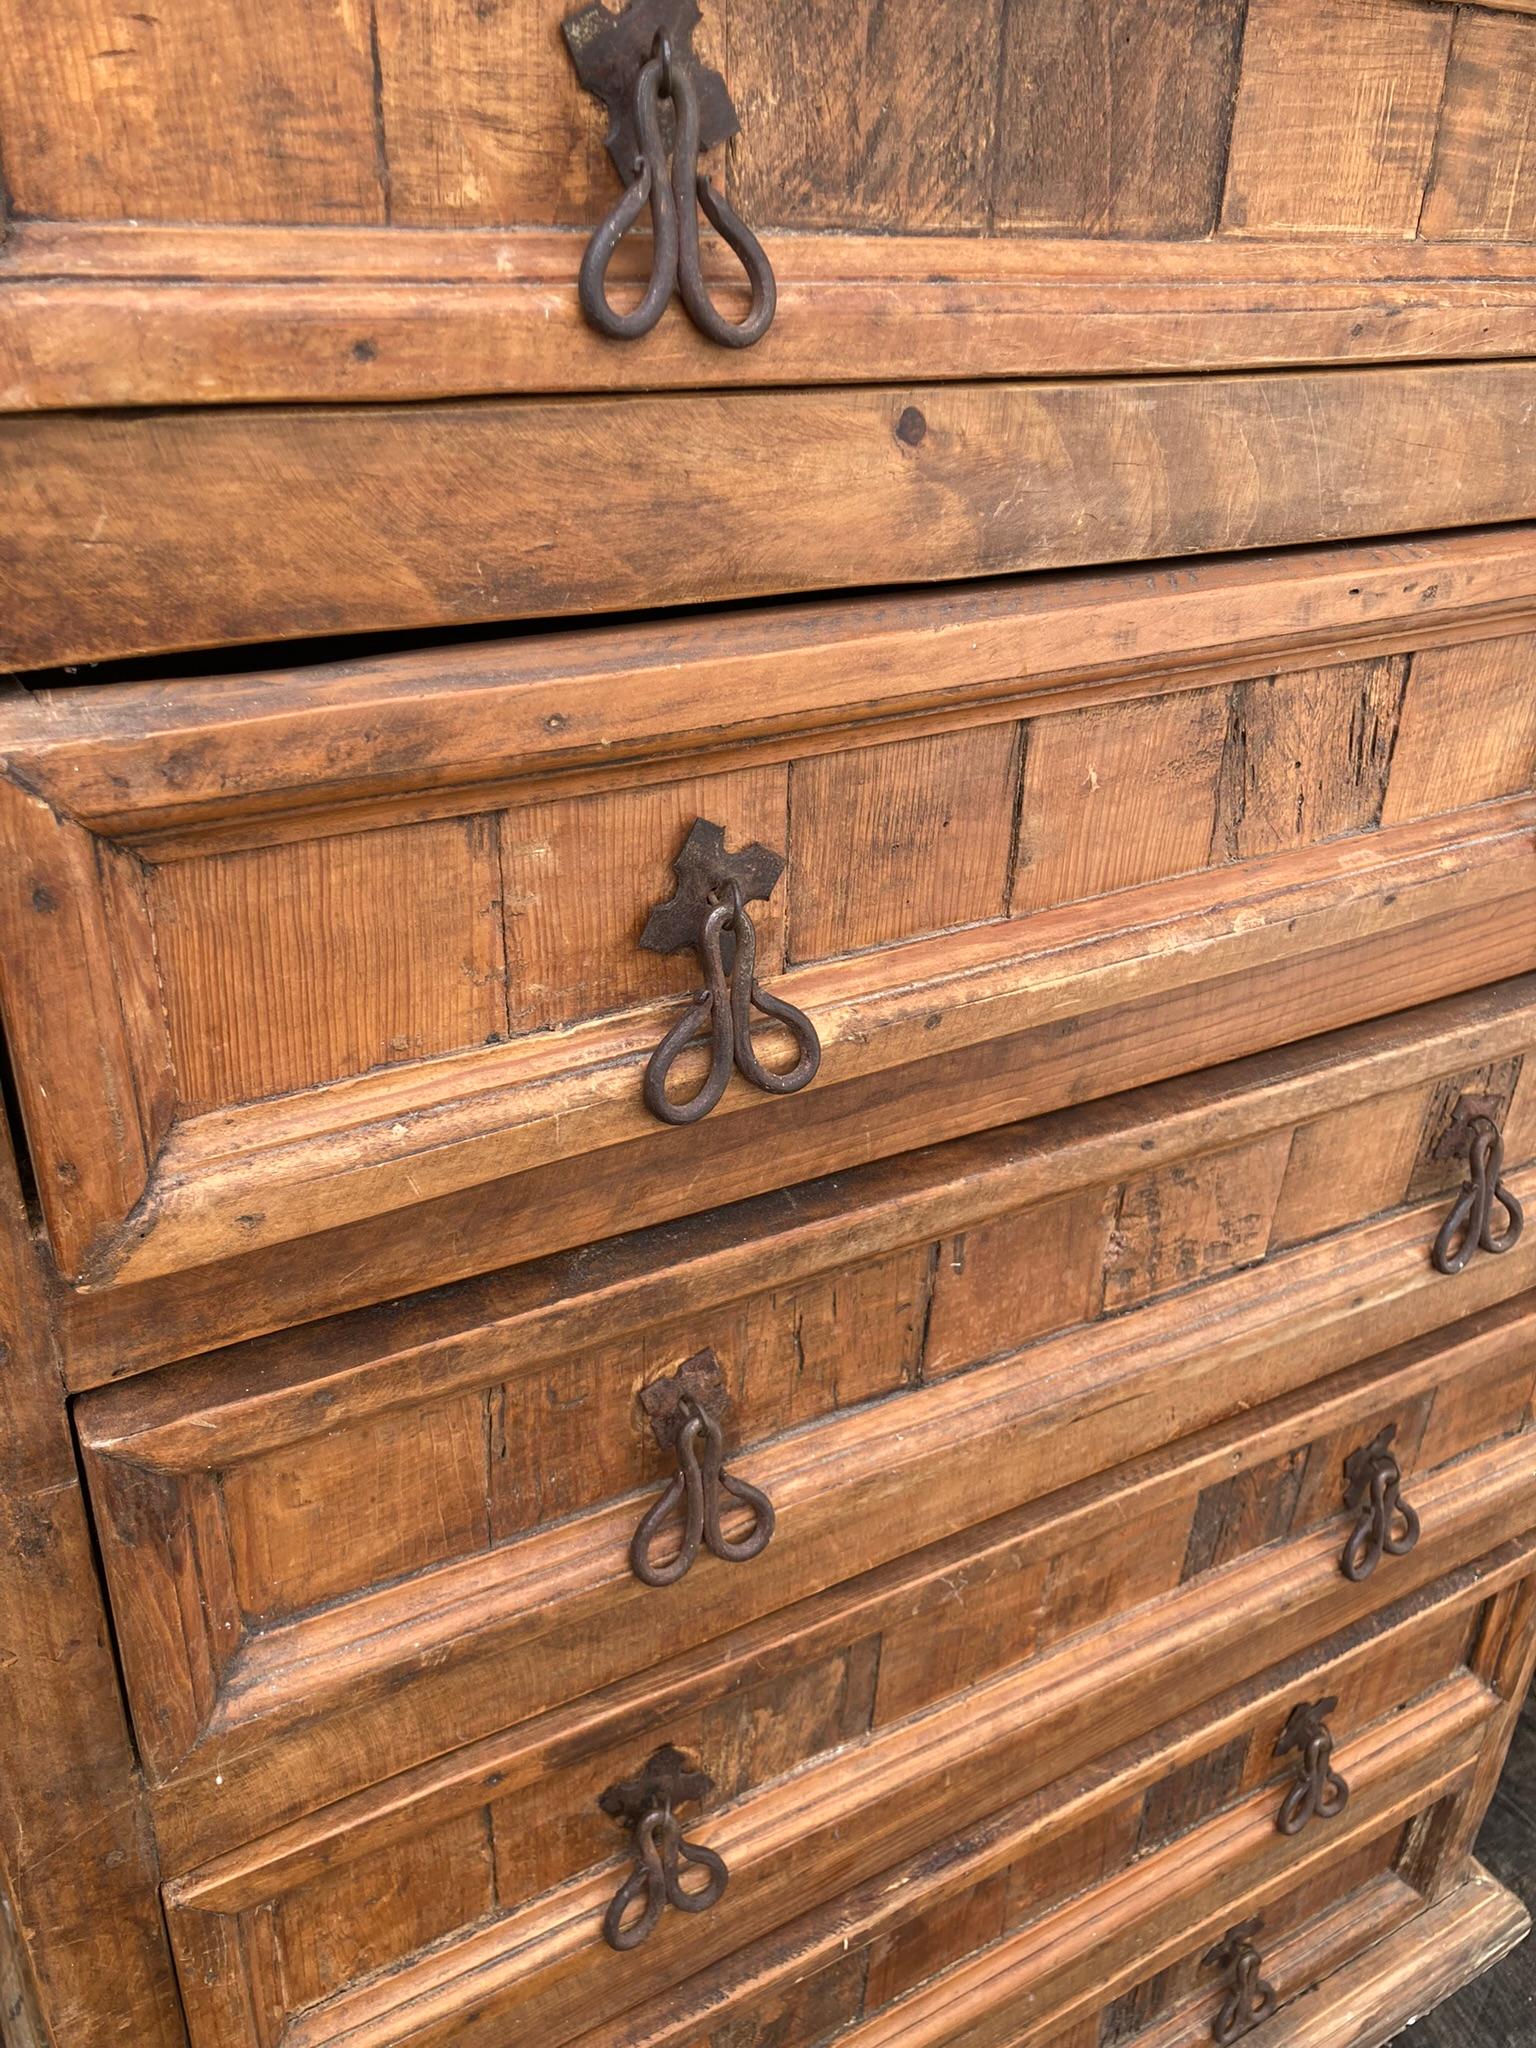 Solid Oak Tall Boy or High Chest, 7 Large Drawers, possibly Spanish Mid Century with cast iron handles. A practical and imposing piece of furniture built to last for centuries. A rustic look with antique charm.

H: 130cm

W: 84cm

D: 46cm